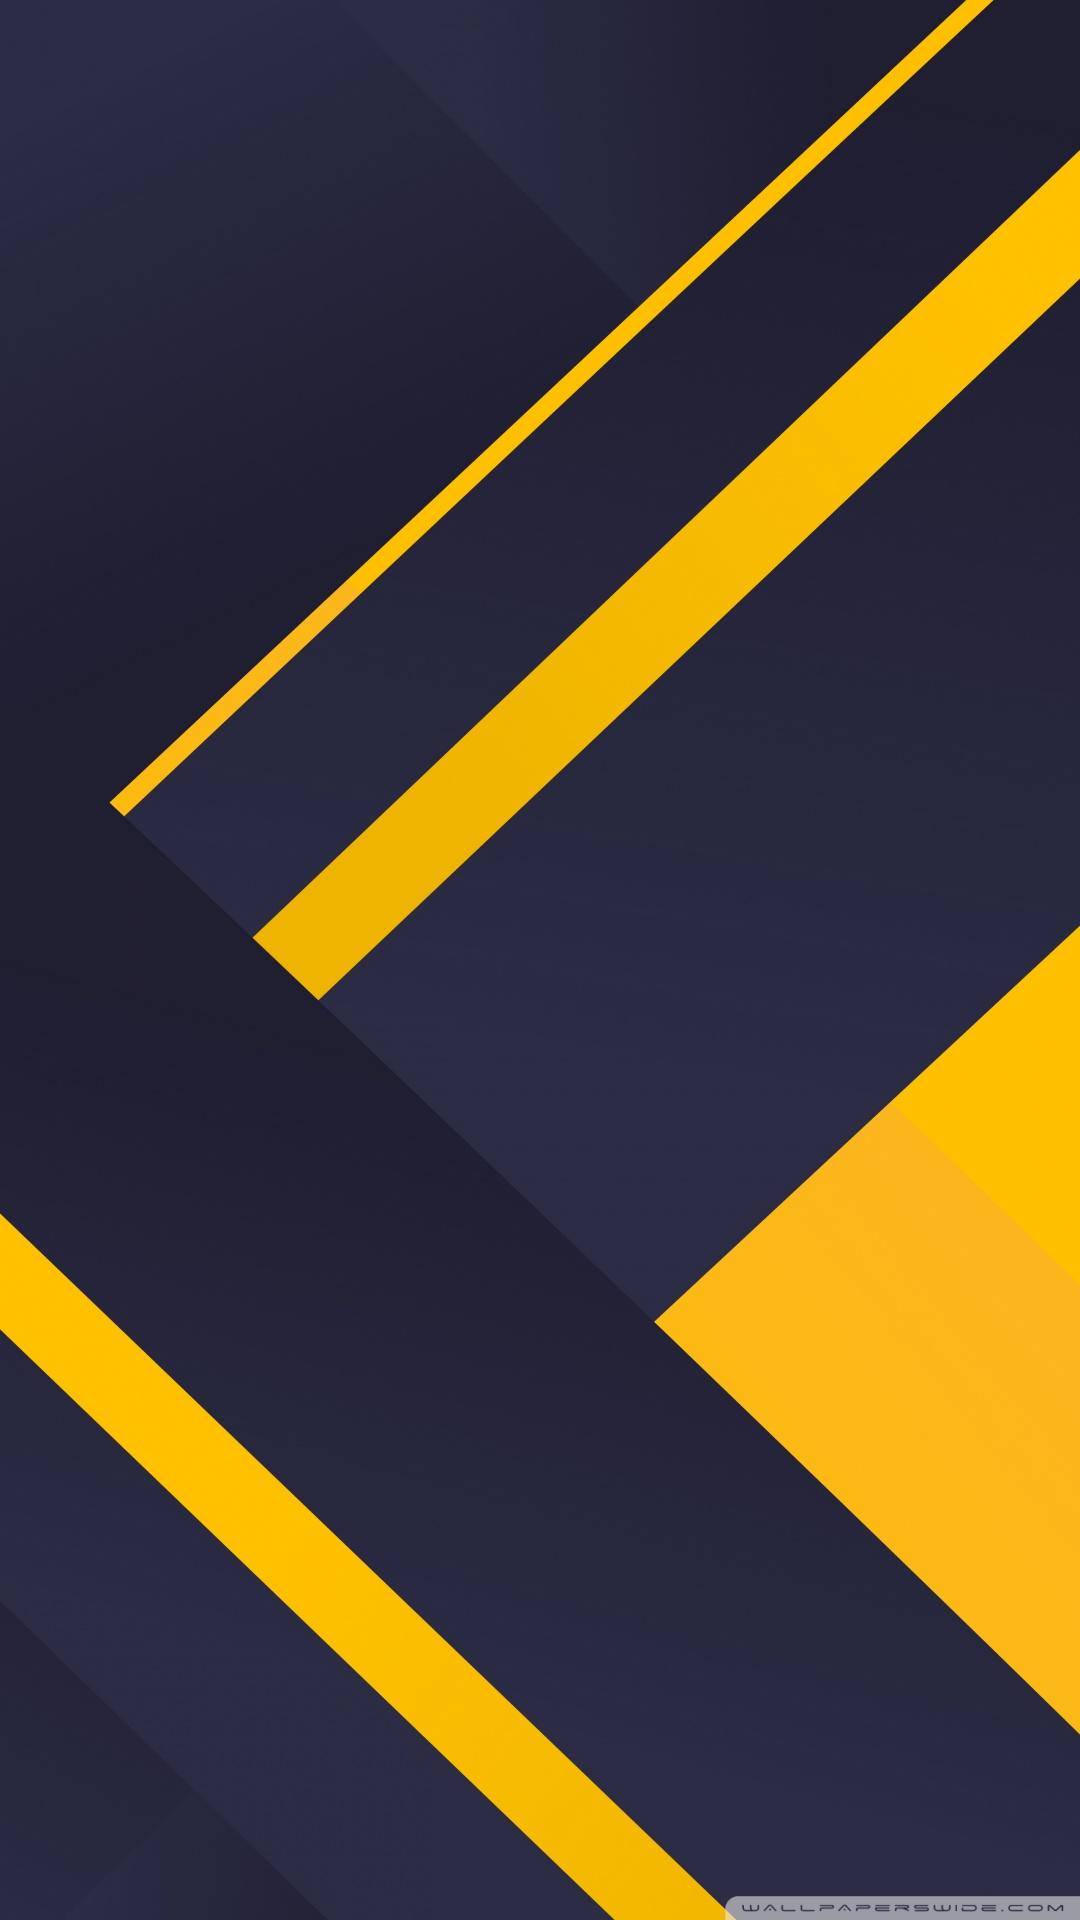 Navy Blue and Yellow Shapes ❤ 4K HD Desktop Wallpaper for 4K Ultra